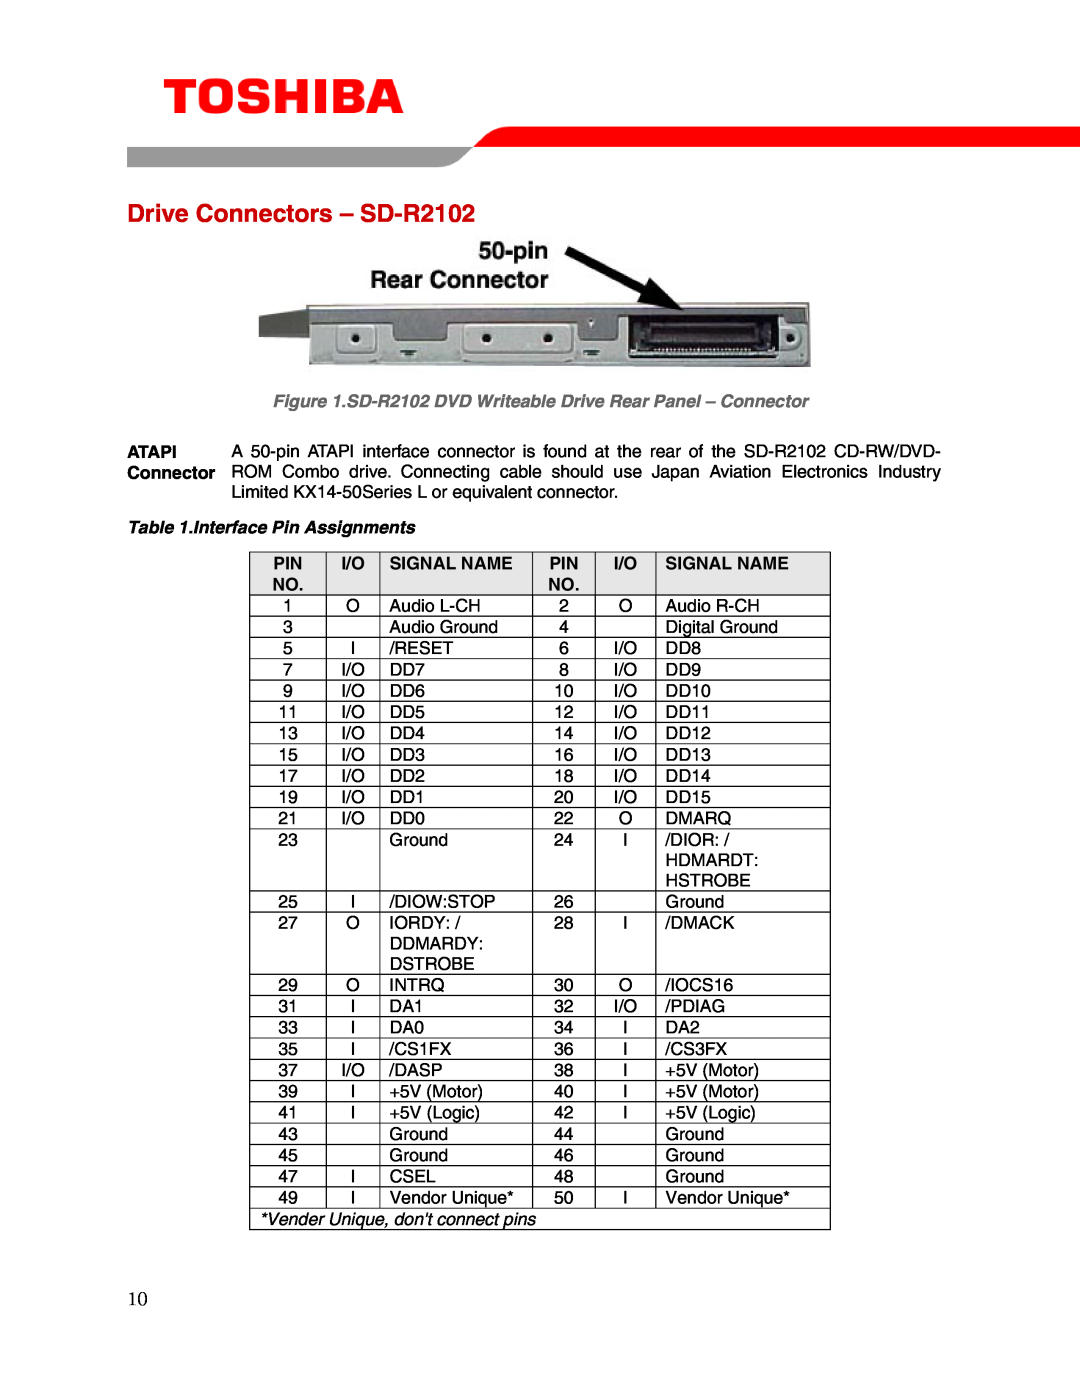 Toshiba user manual Drive Connectors - SD-R2102, Interface Pin Assignments, Vender Unique, dont connect pins 